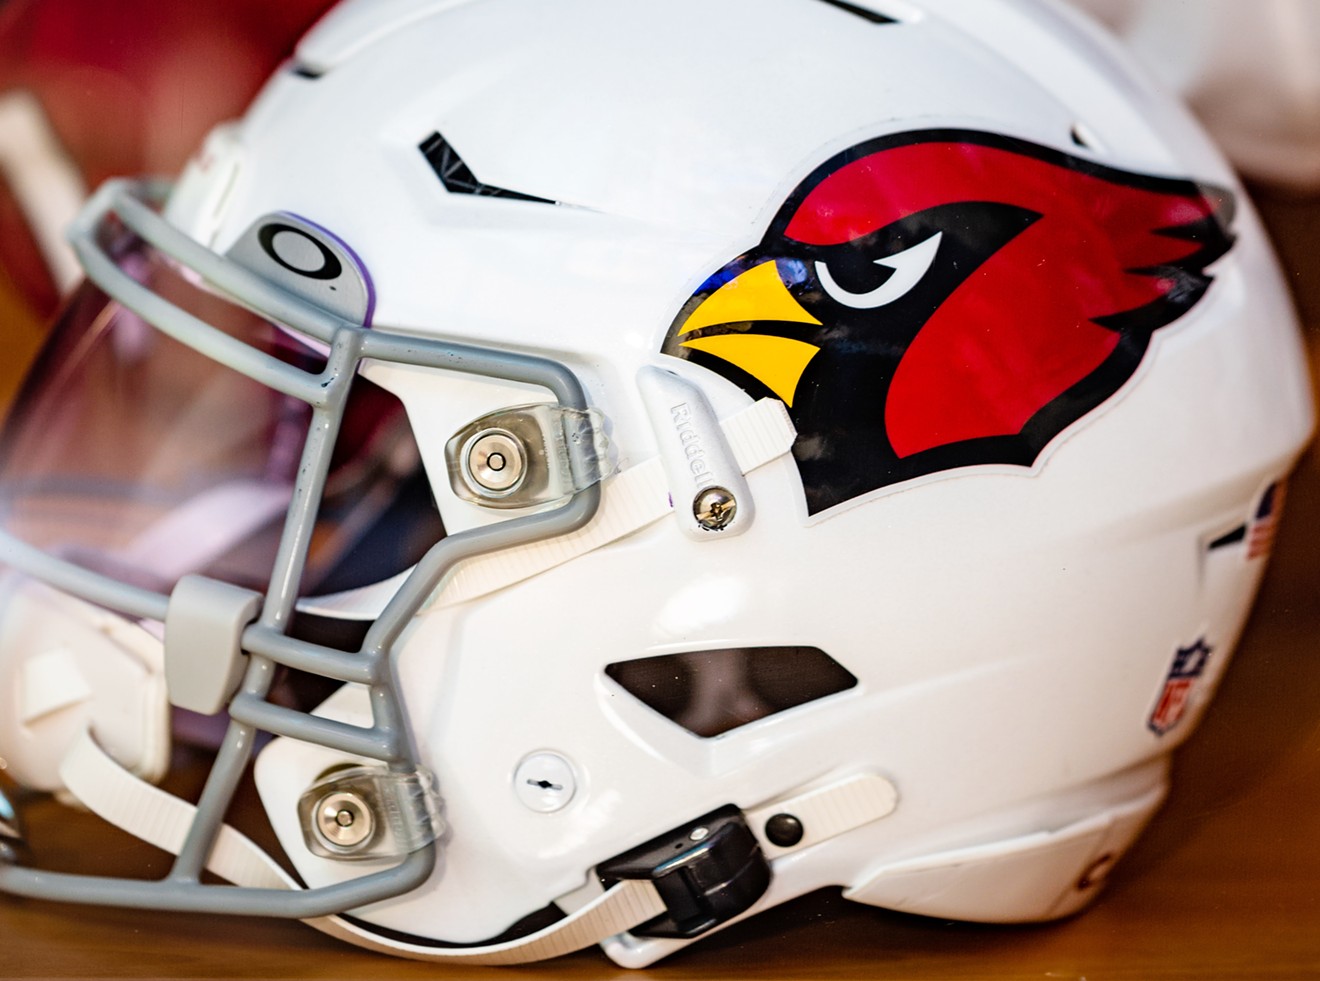 The Arizona Cardinals are the most likely team in the NFL to break hearts this season, according to a new study.